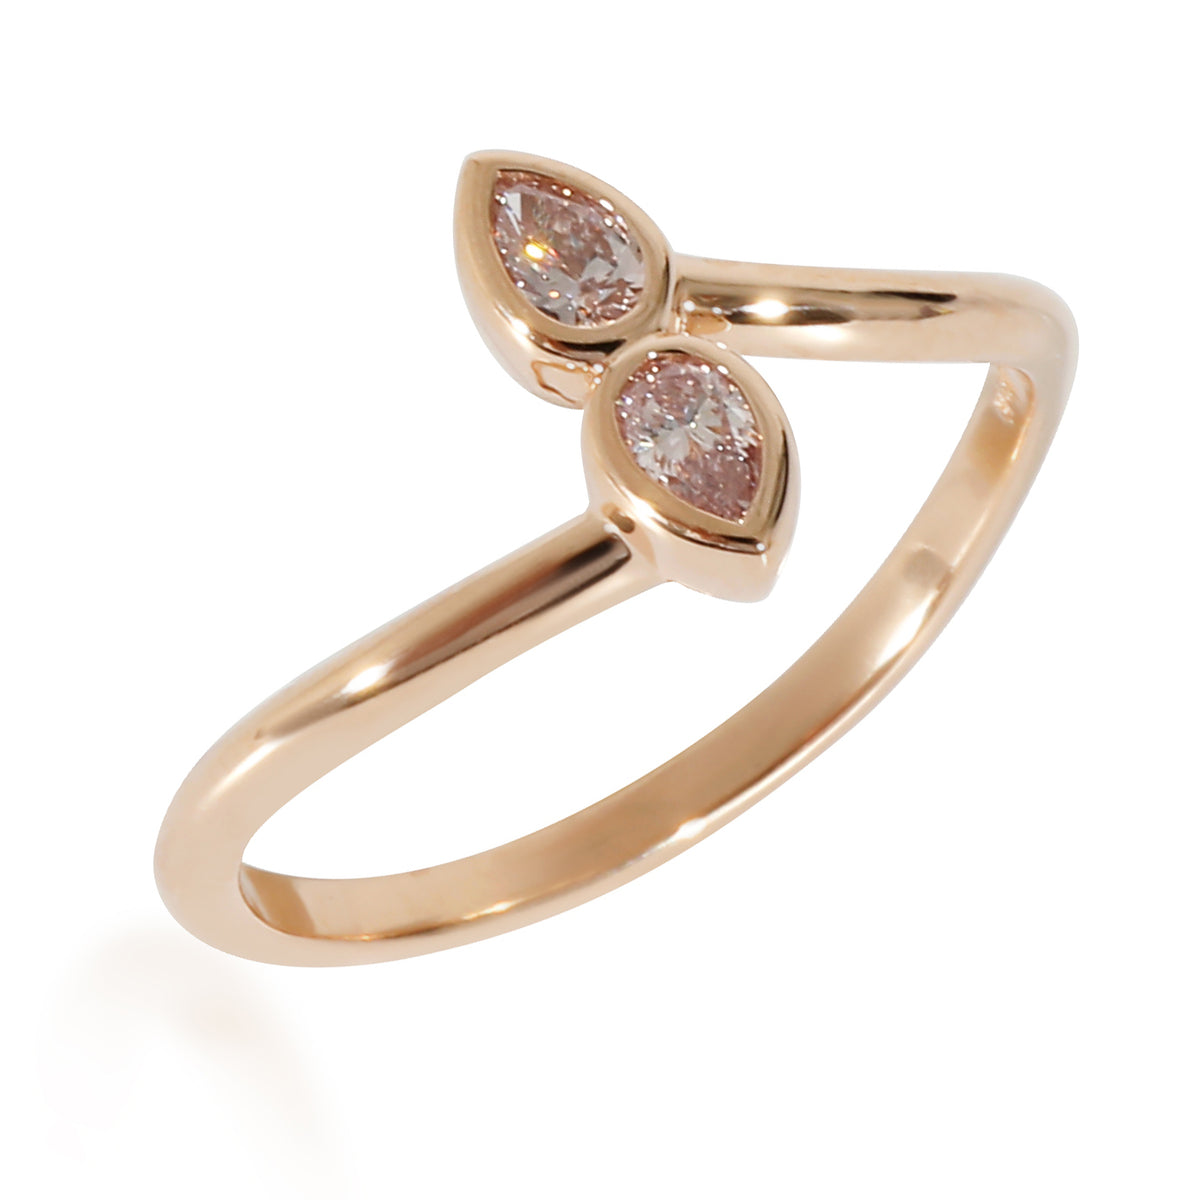 Pink Pear Shaped Diamonds Mirror Ring in 18K Rose Gold, 0.16 Ctw